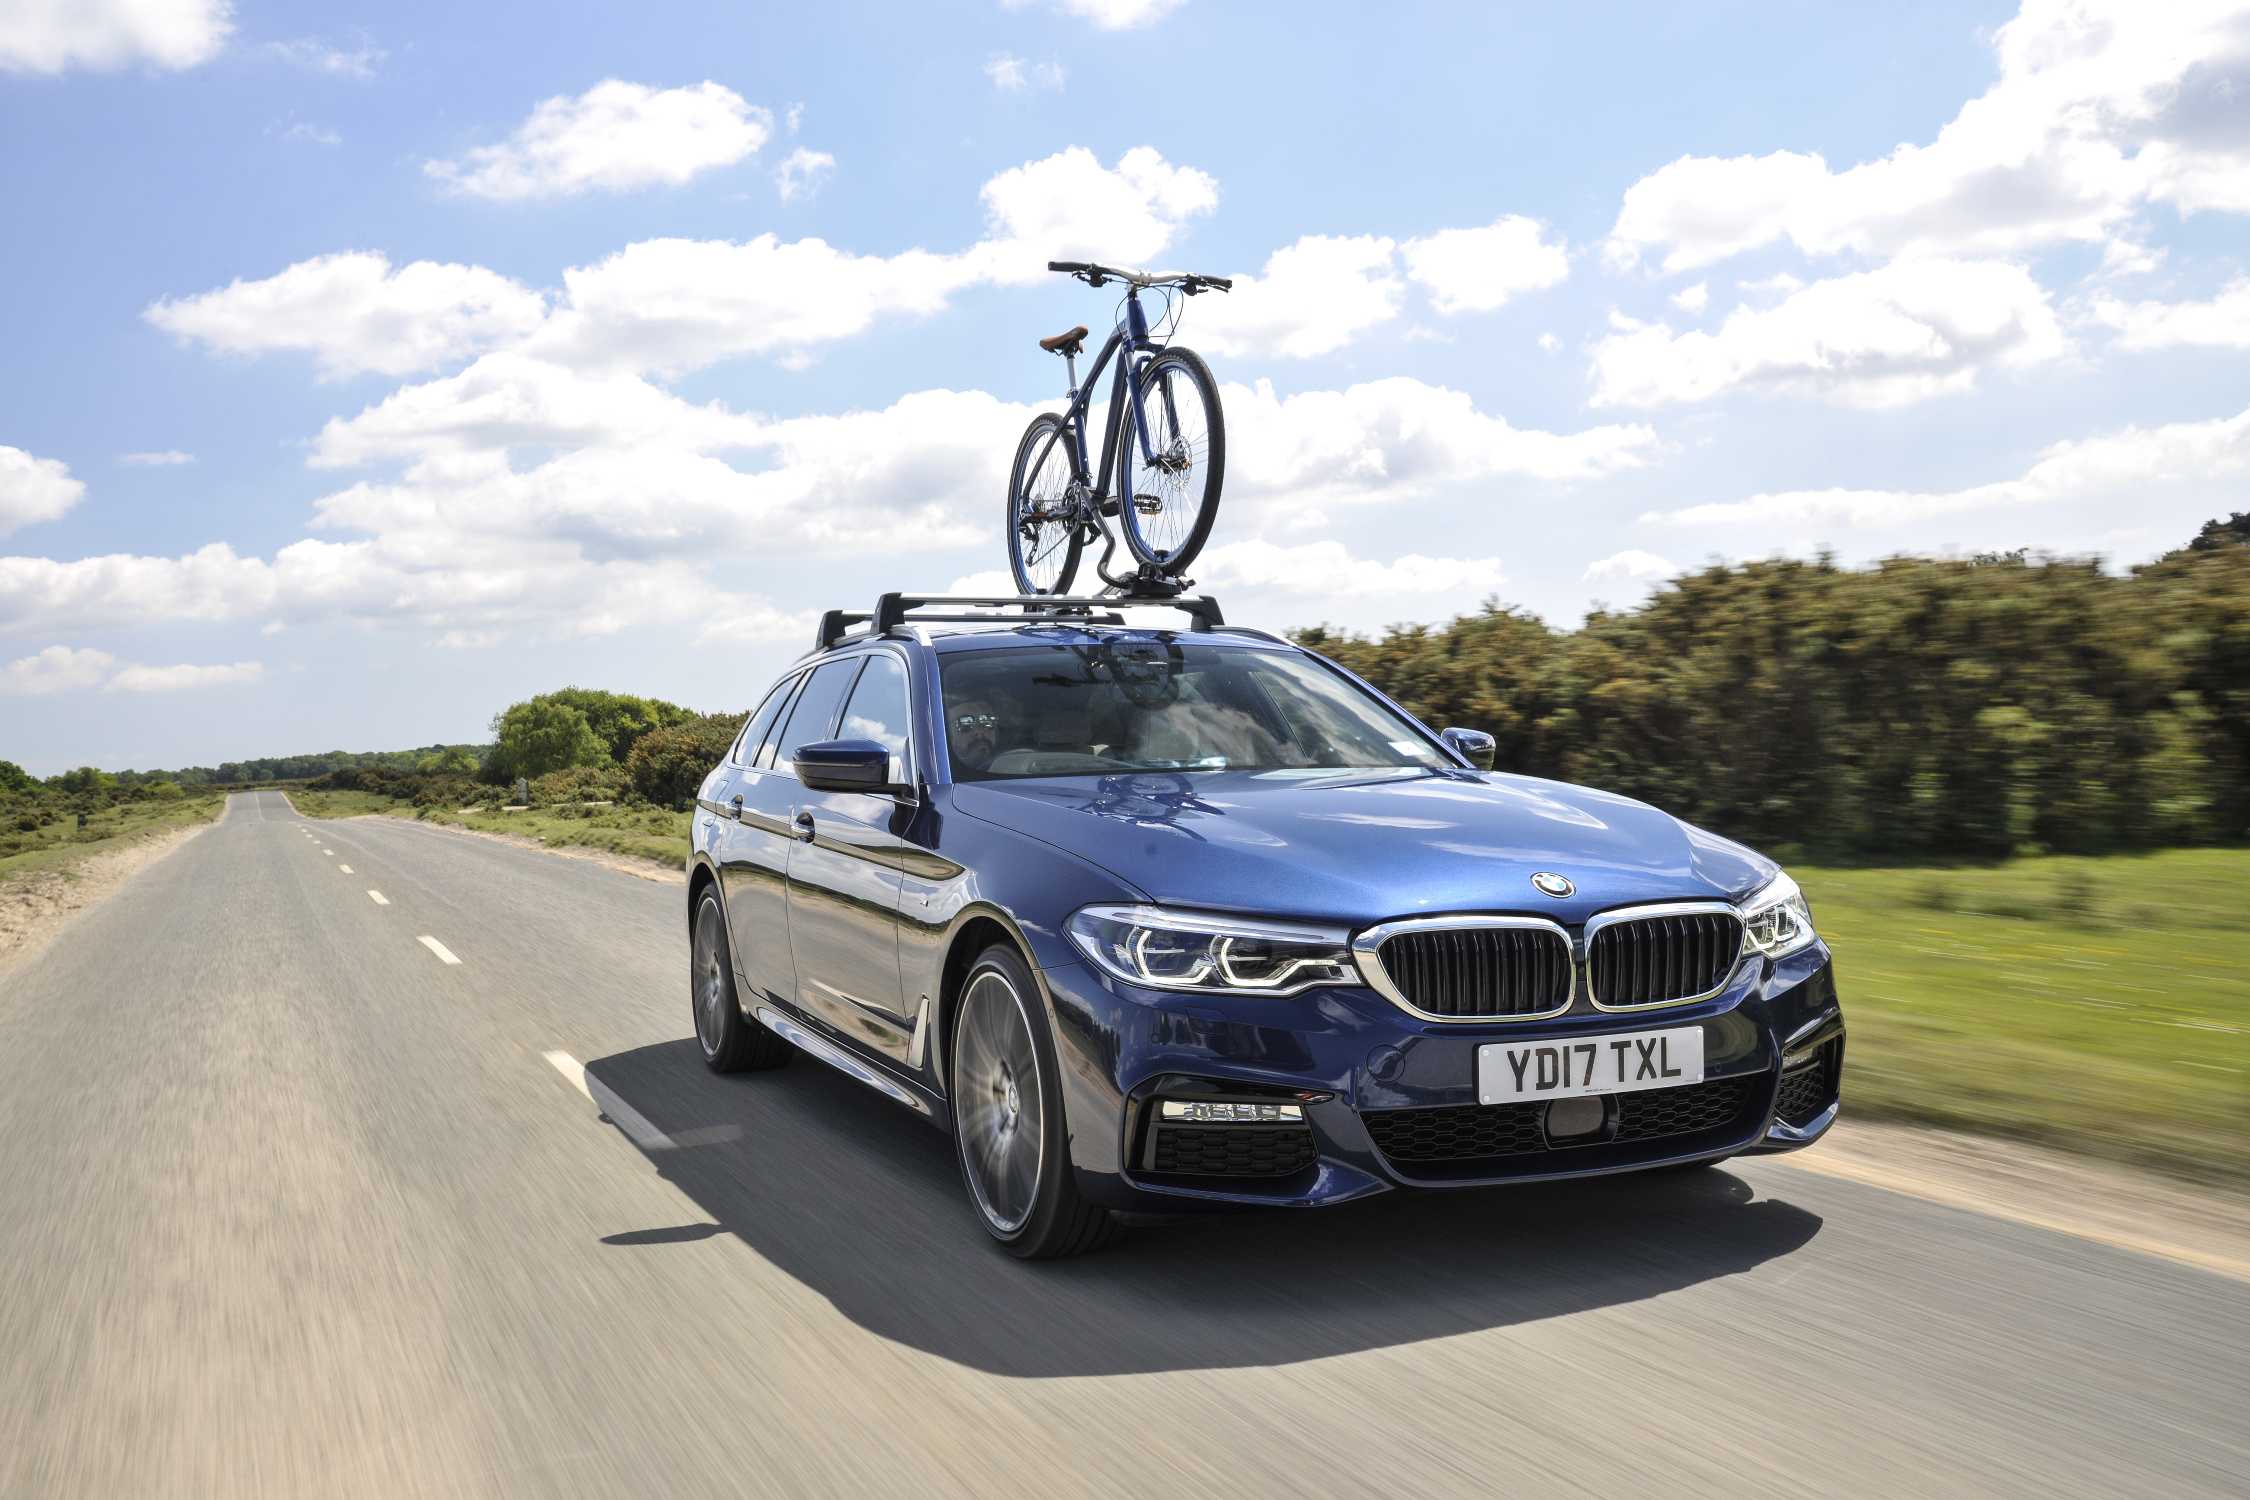 The new BMW 5 Series Touring